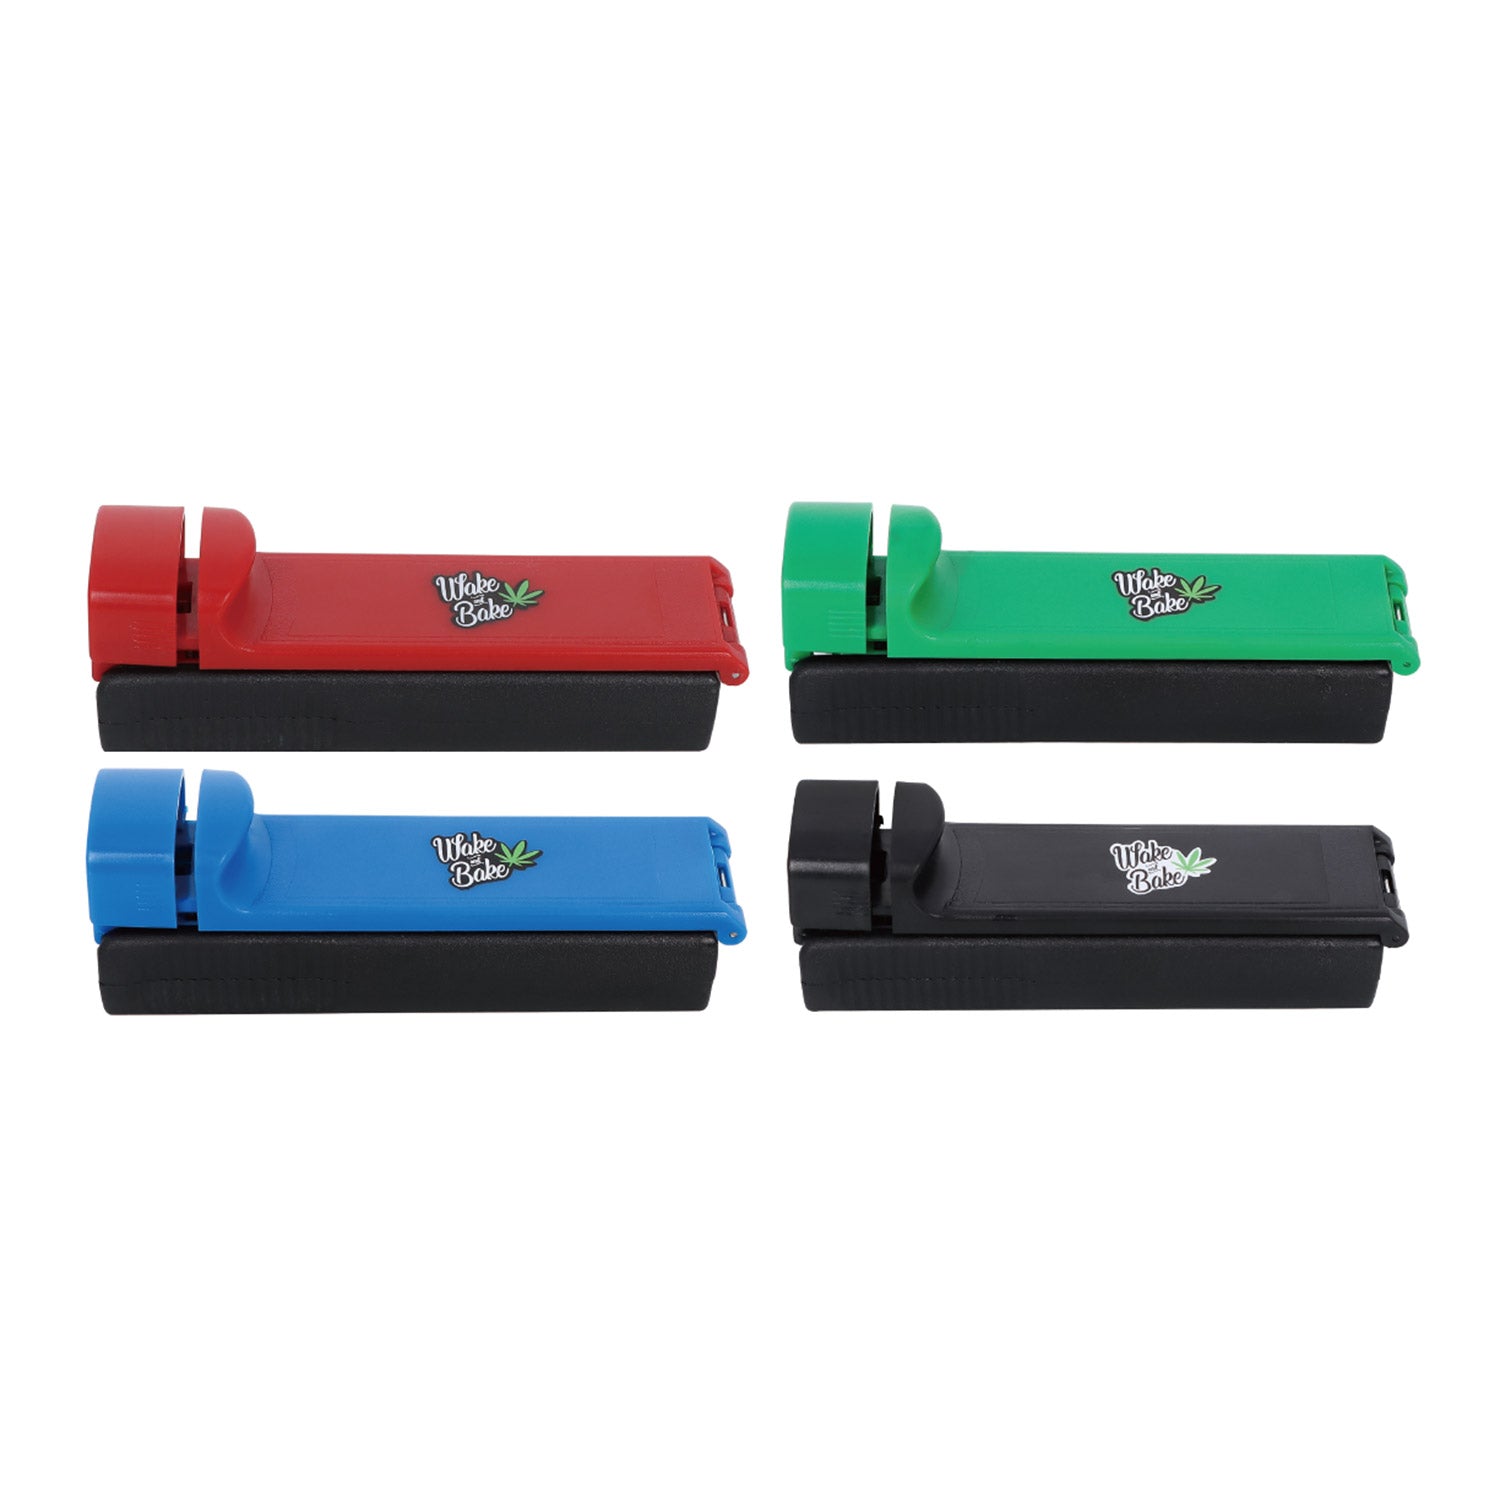 HORNET brand smoke puller covered with silk screen wake bake letters  12 pcs/1 display box